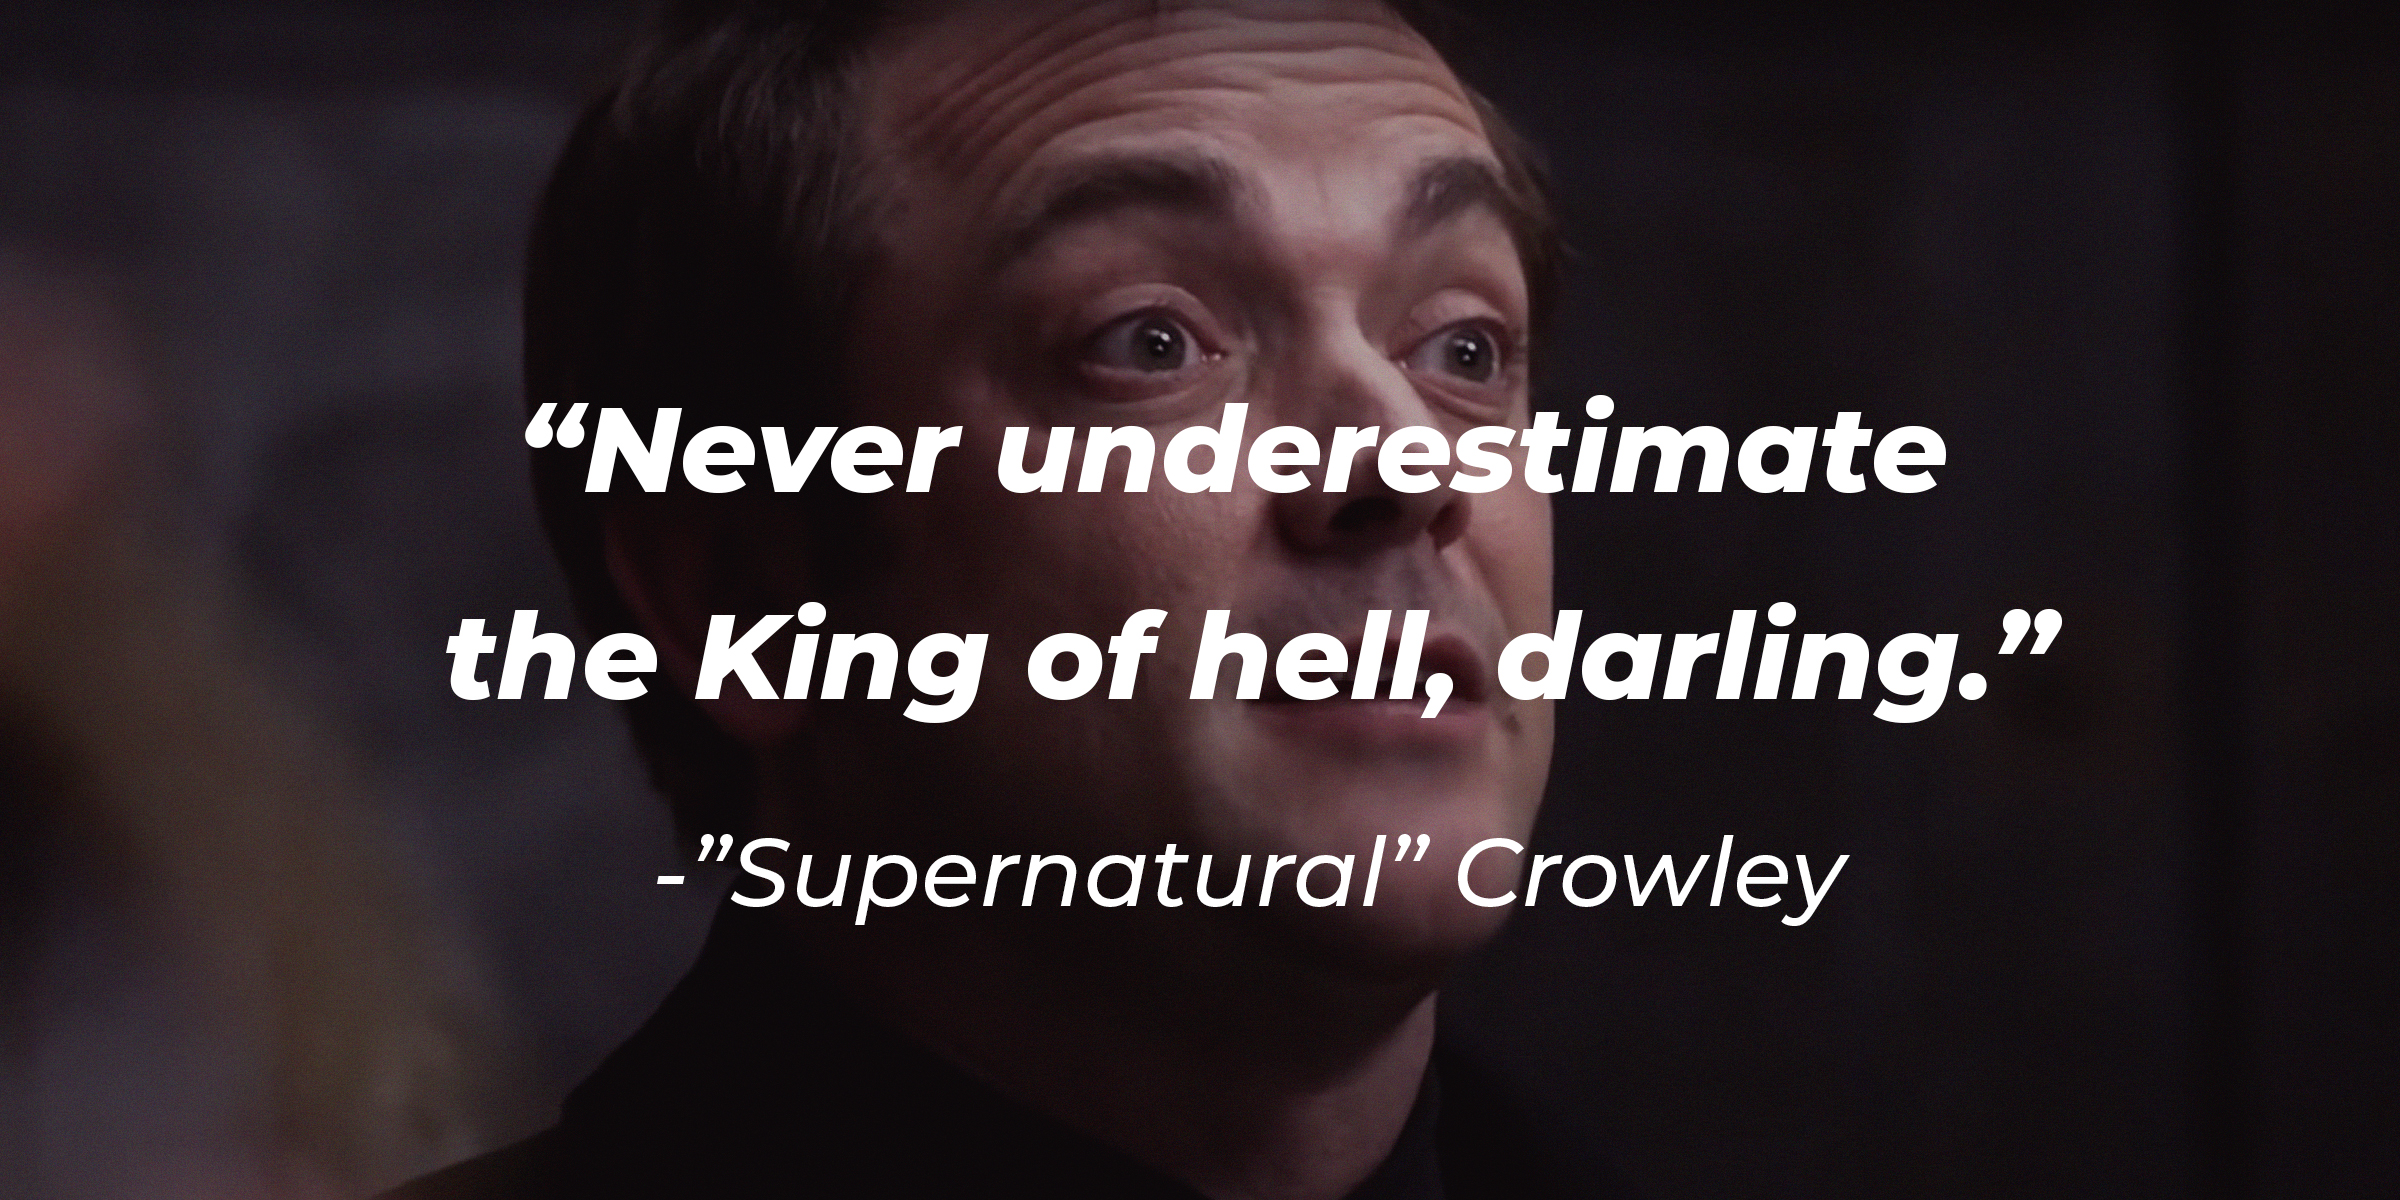 A photo of Crowley from the "Supernatural" with the quote, "Never underestimate the King of hell, darling." | Source: facebook.com/Supernatural